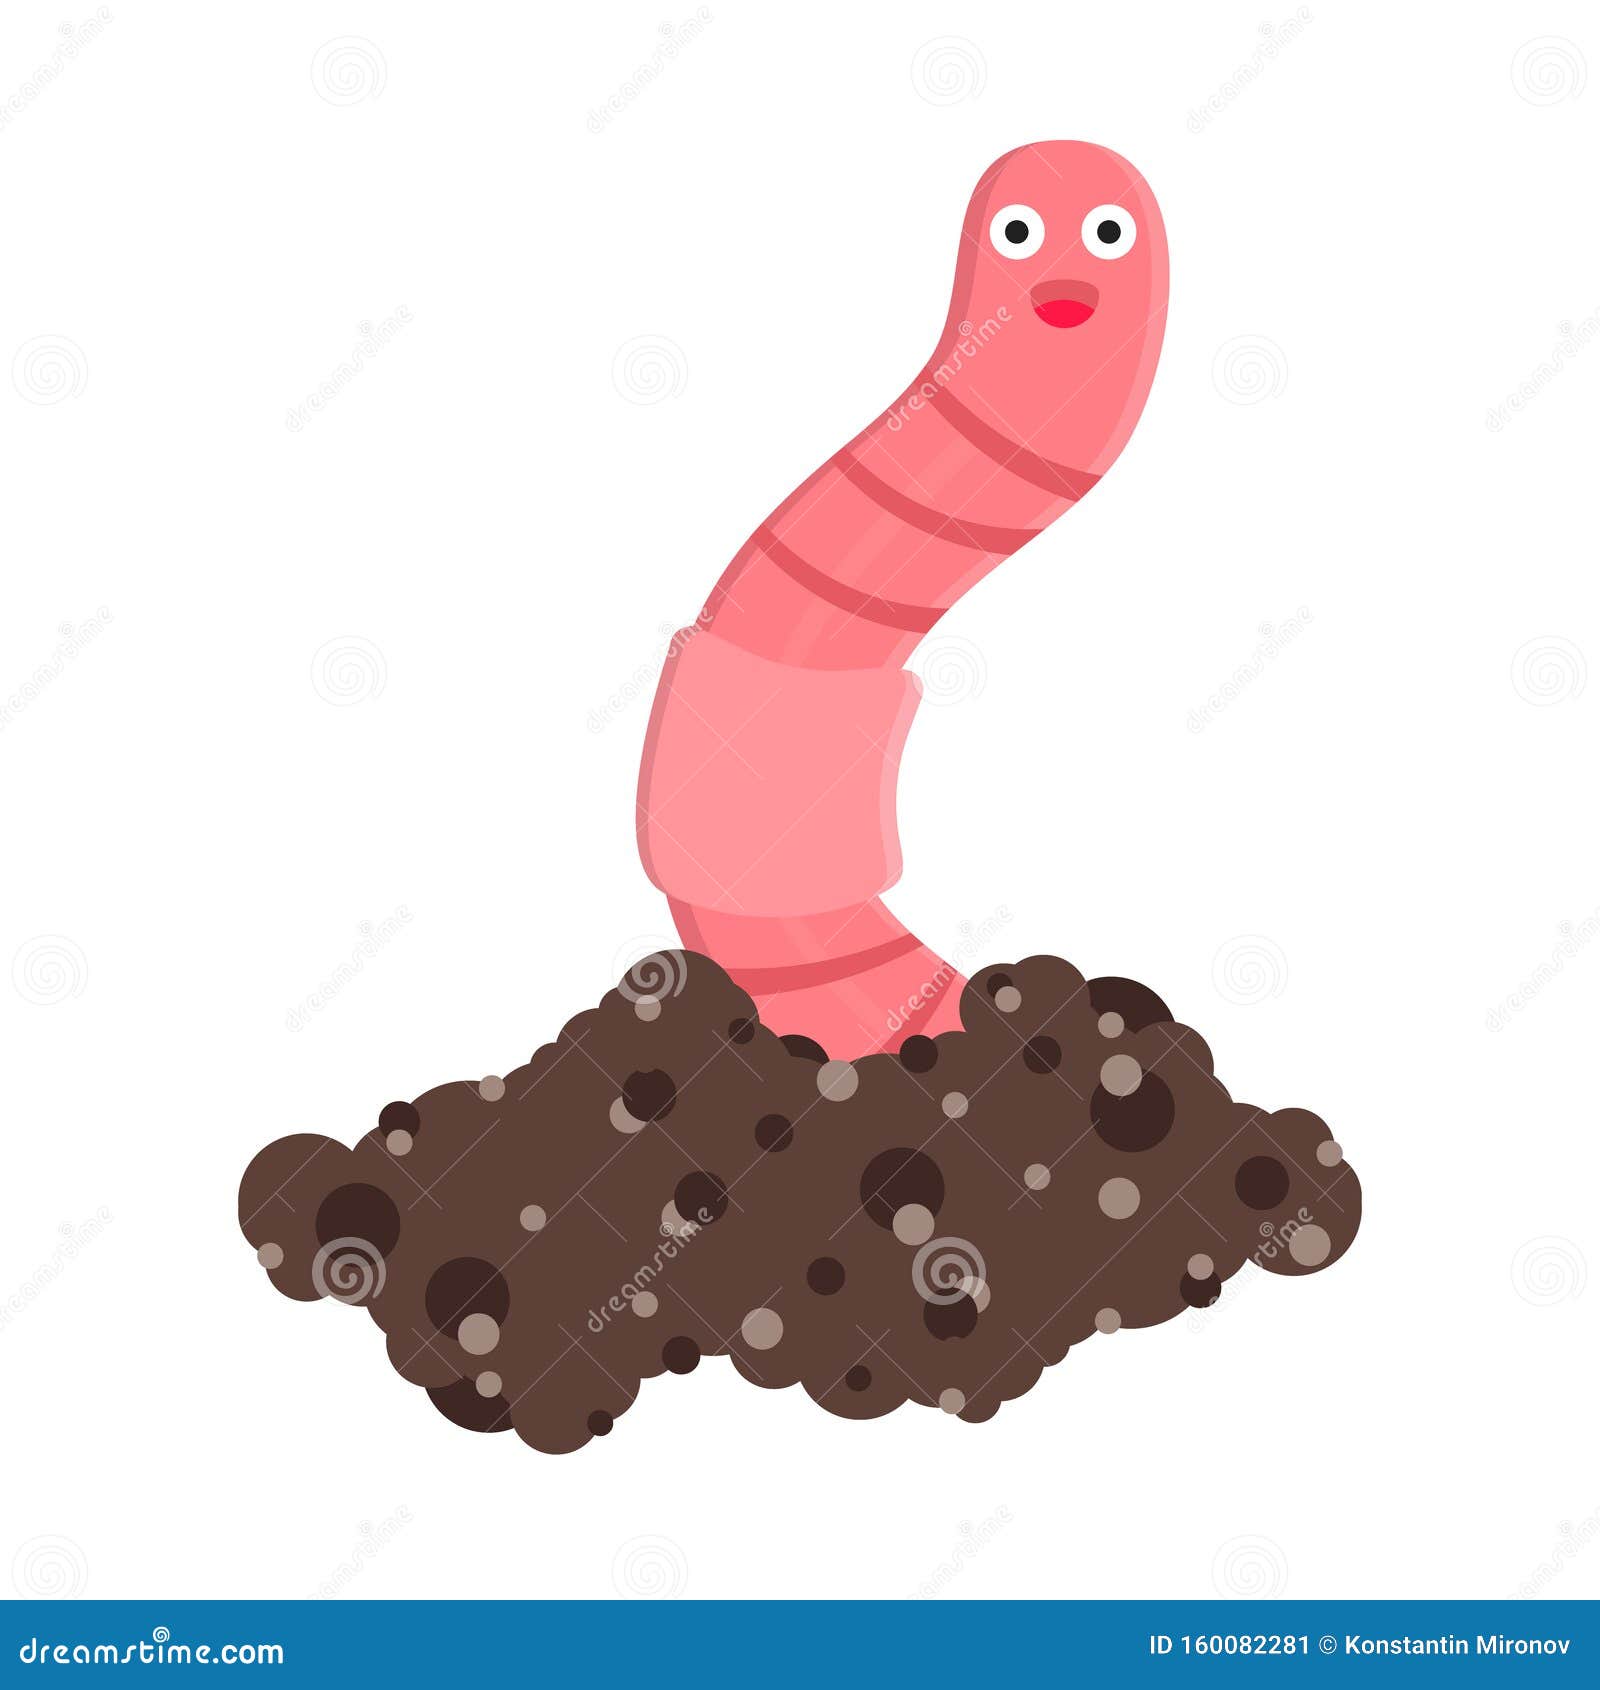 https://thumbs.dreamstime.com/z/earthworm-cartoon-character-icon-sigh-worm-face-expression-smilling-earthworm-cartoon-character-icon-sigh-worm-face-160082281.jpg